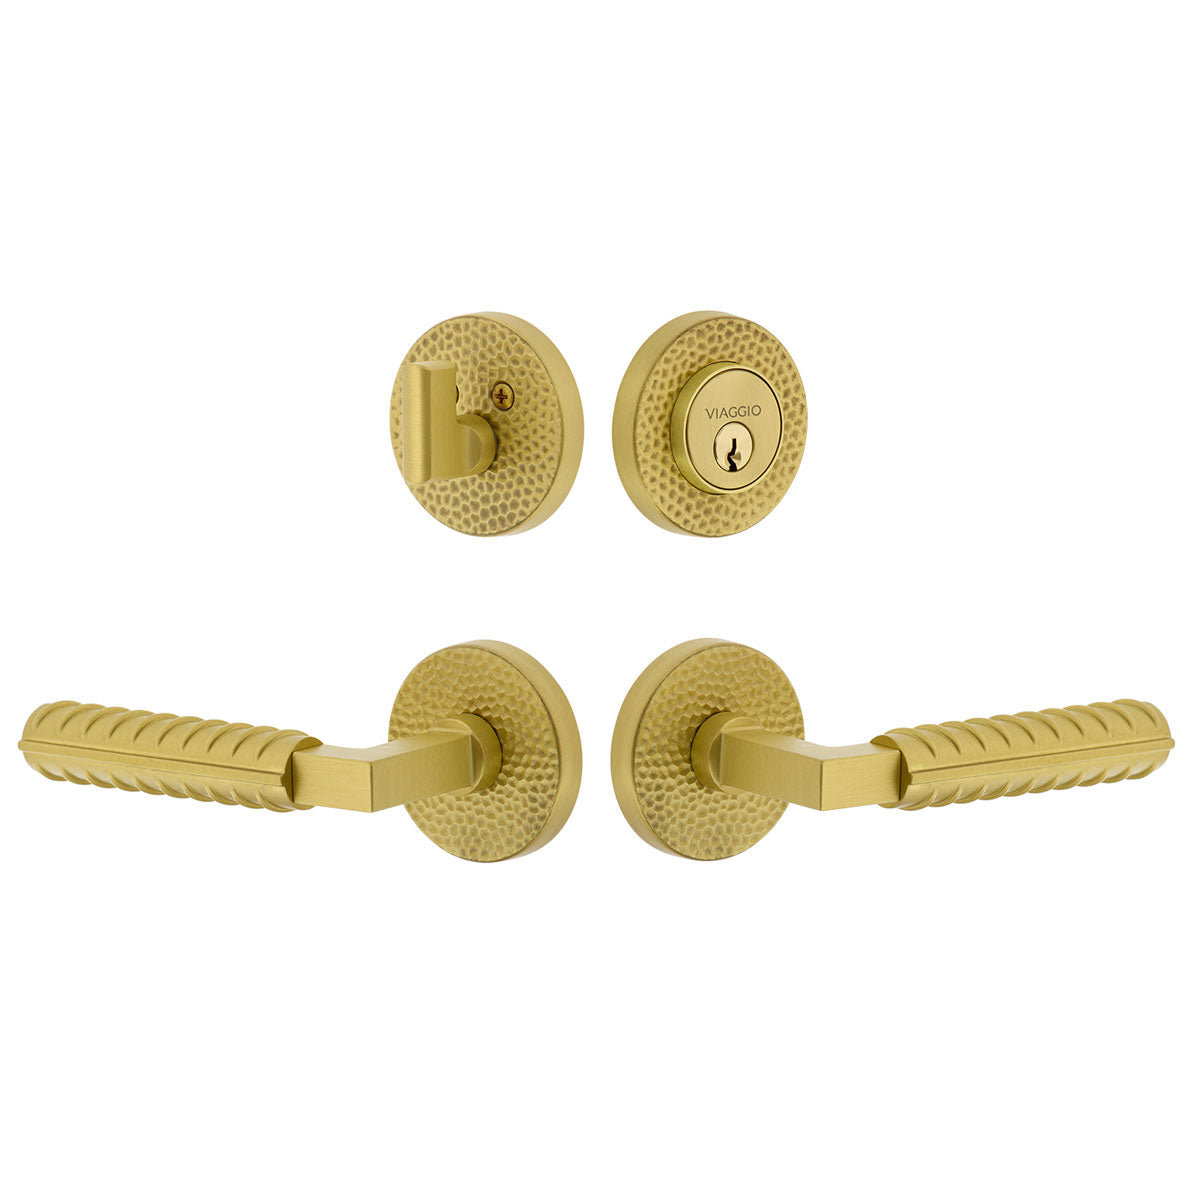 Circolo Hammered Rosette Entry Set with Contempo Rebar Lever in Satin Brass